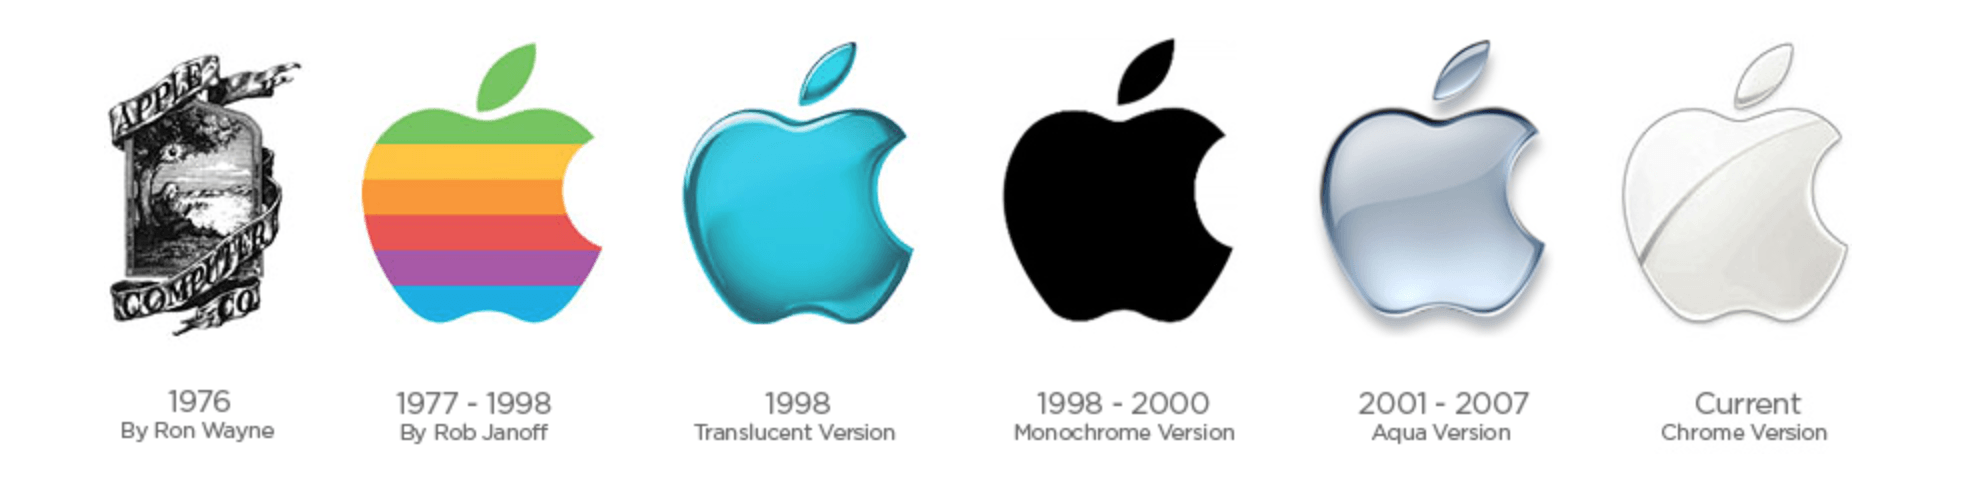 Early Apple Logo - What Makes a World Famous Logo? - Colleen Keith Design